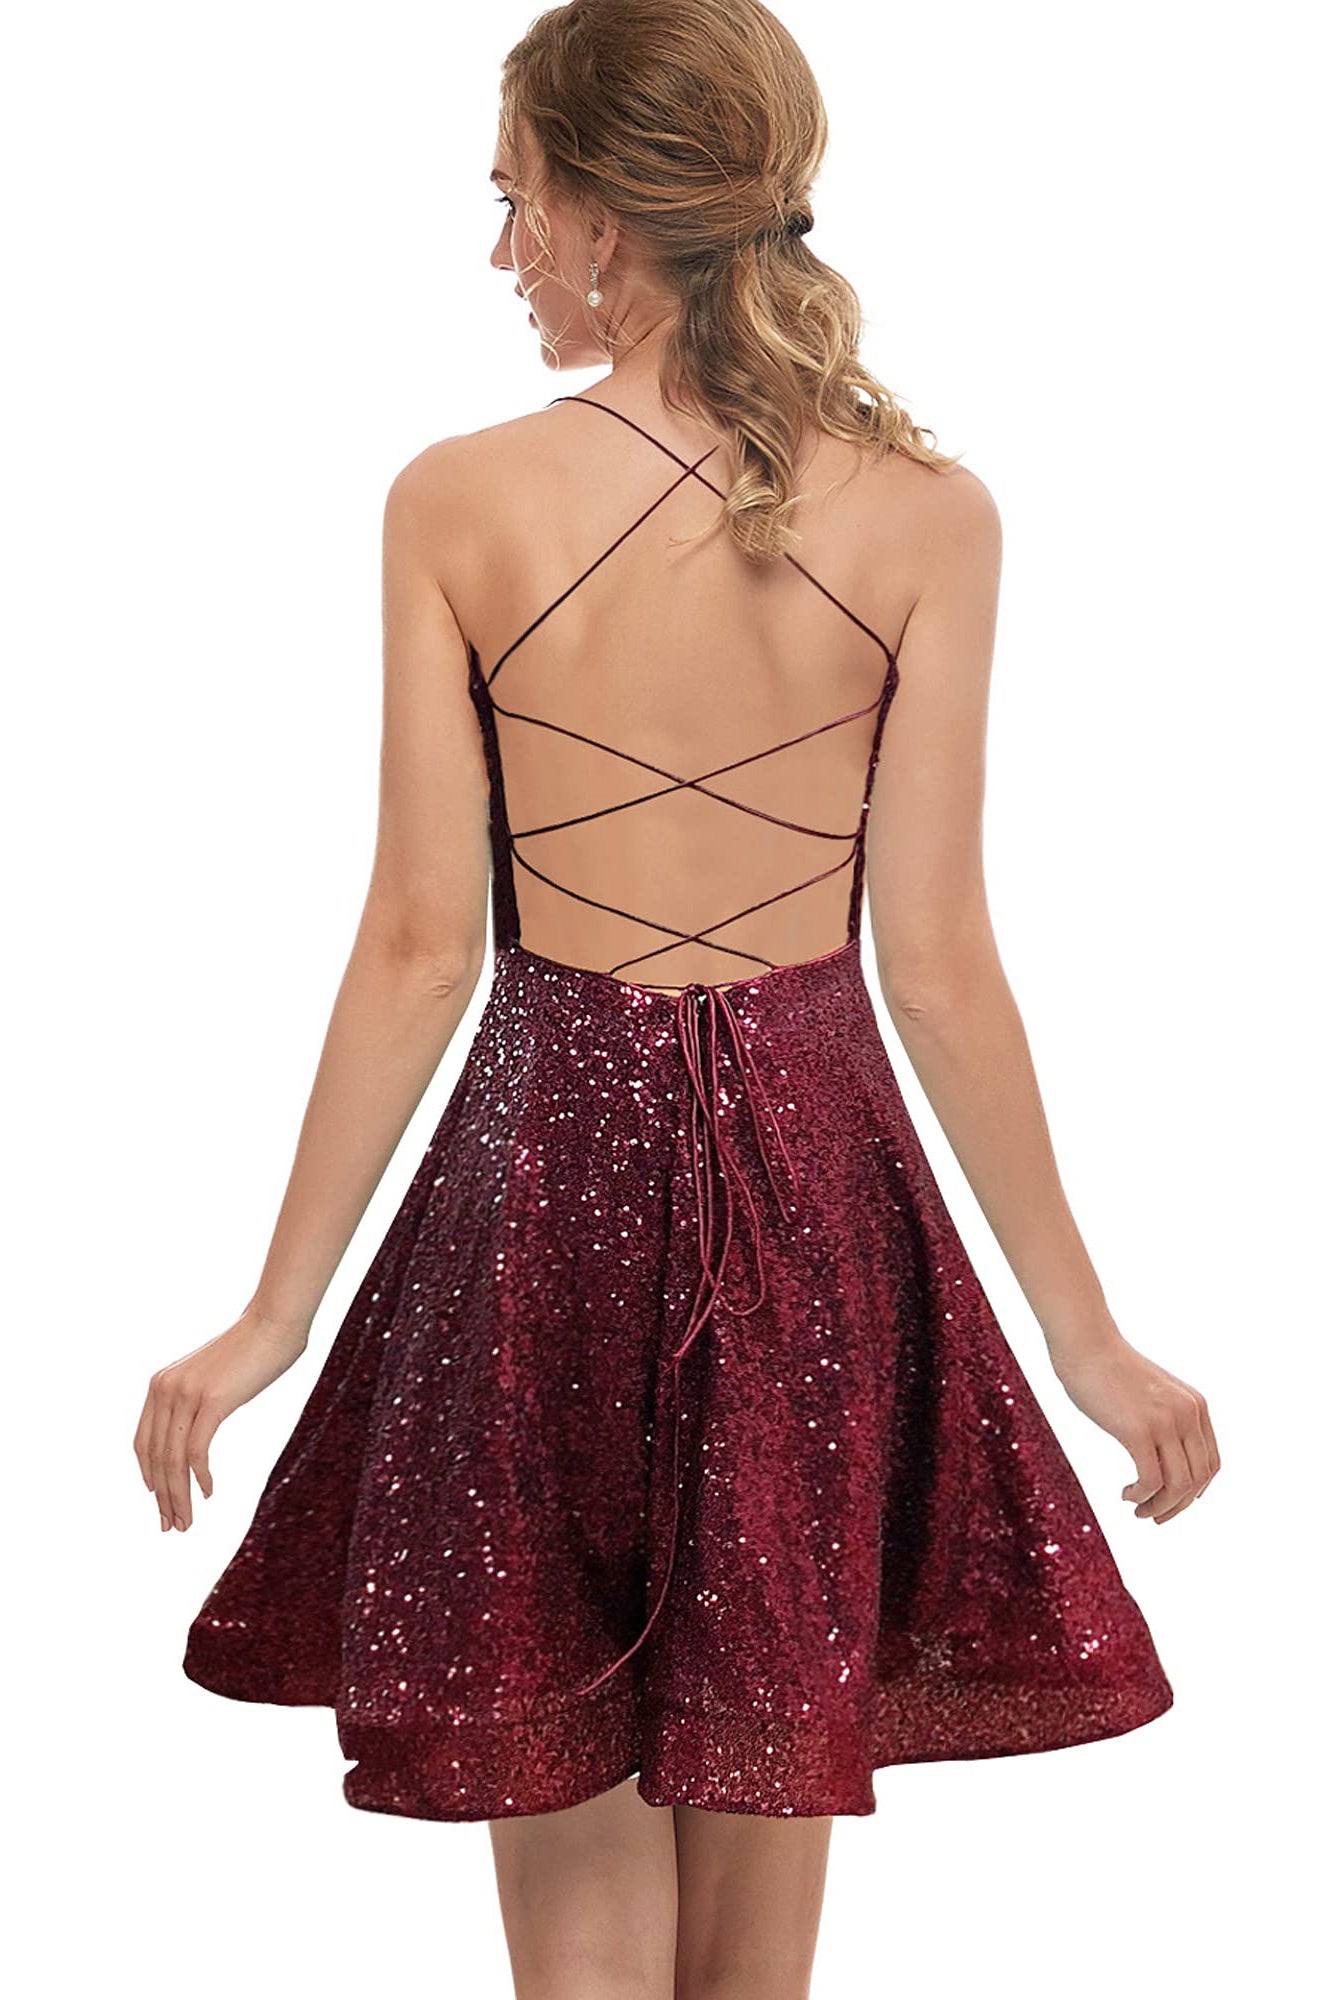 Charming A-Line Burgundy Spaghetti-Straps Homecoming Dress With Sequins